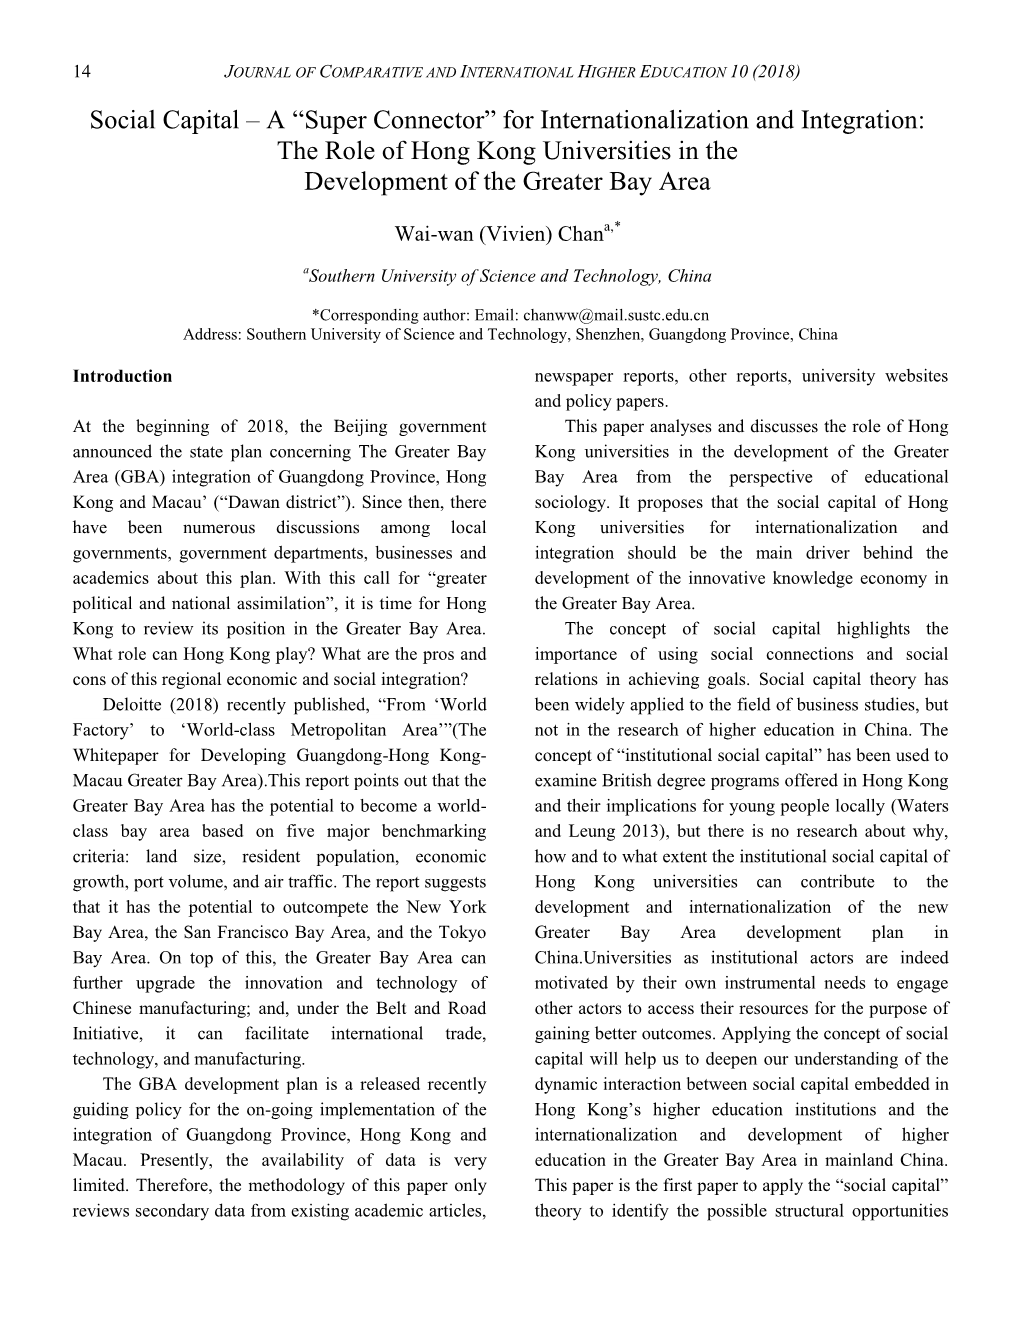 The Role of Hong Kong Universities in the Development of the Greater Bay Area